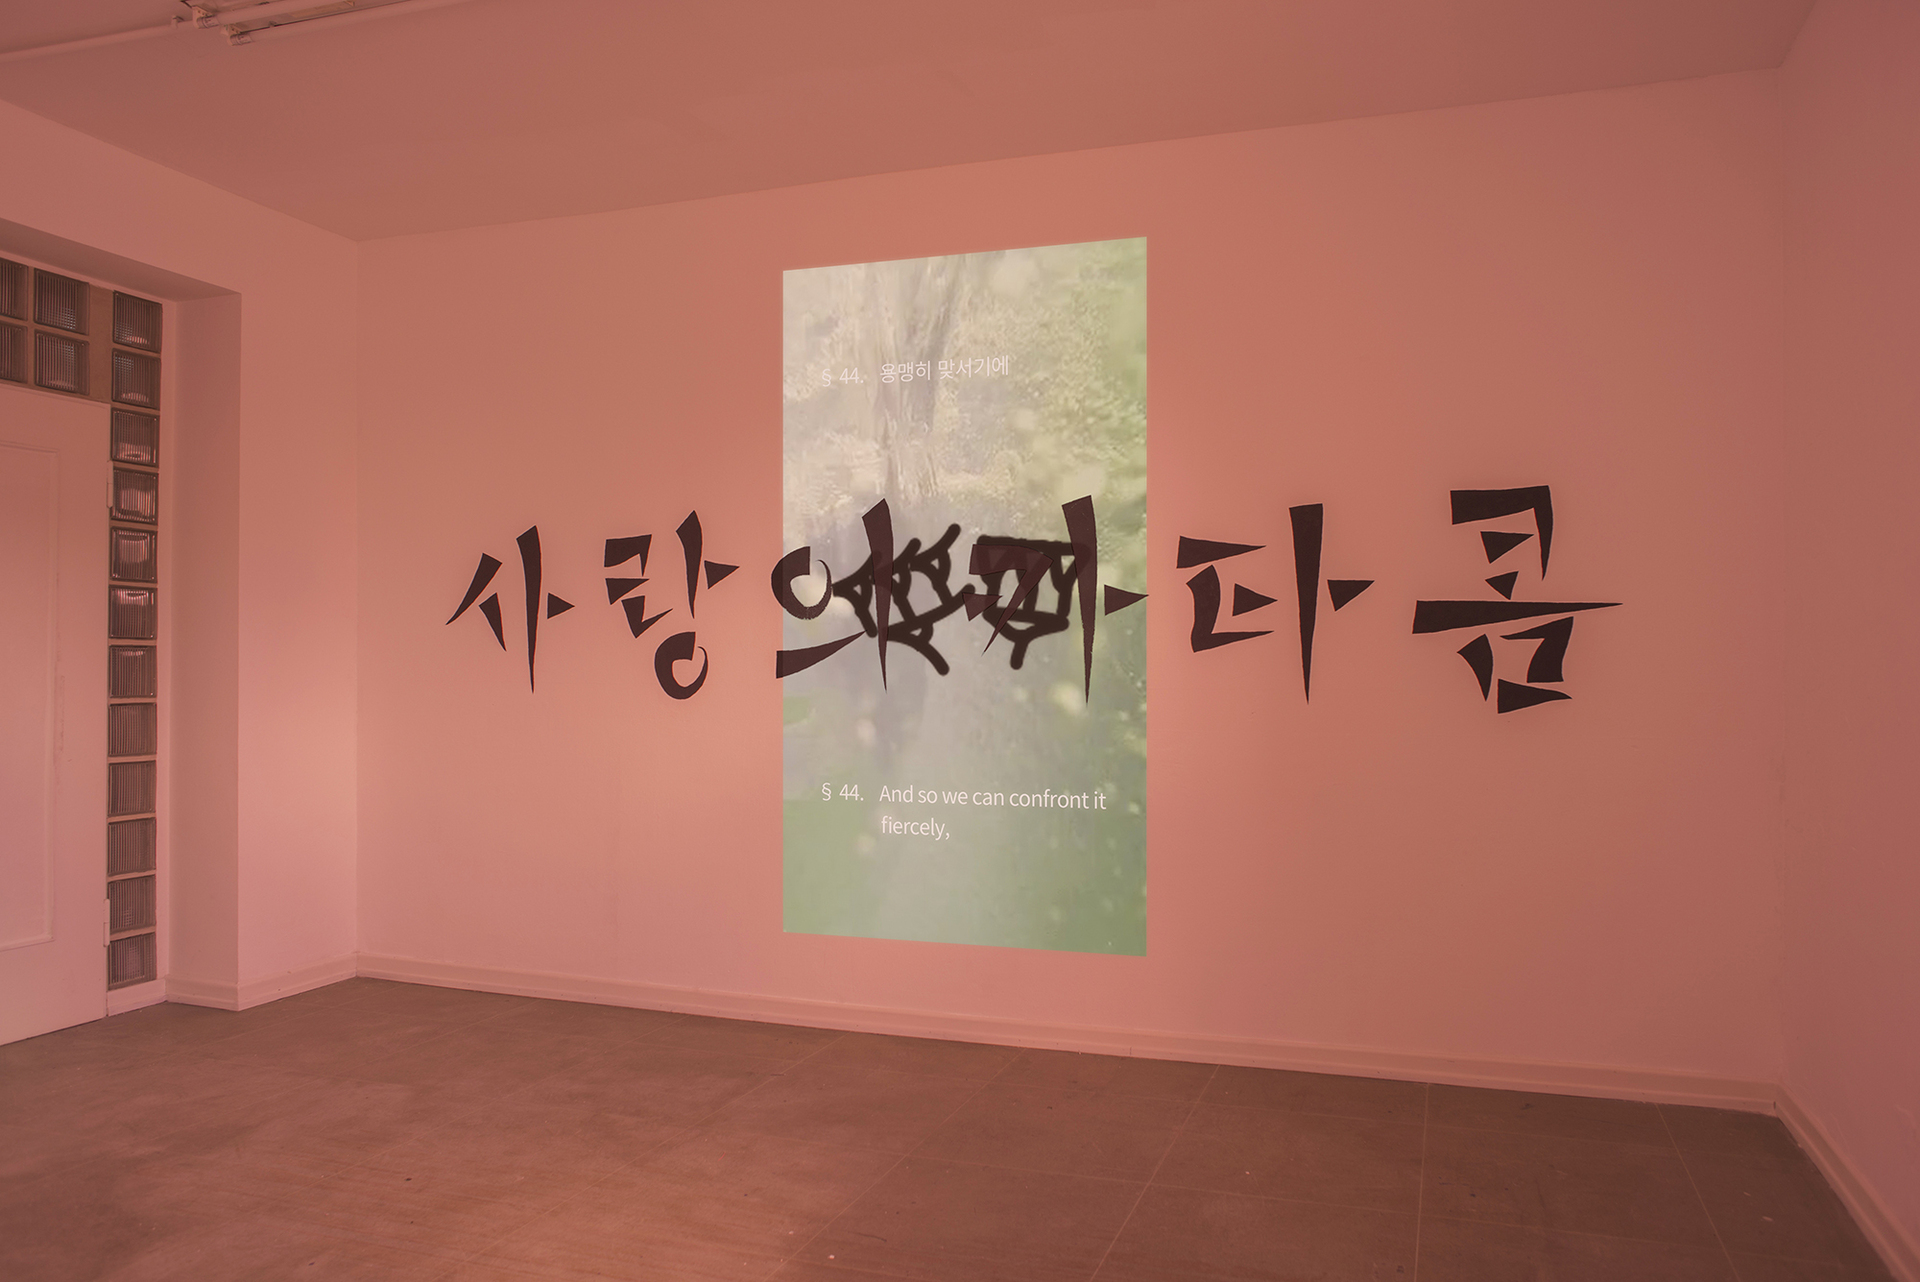 Sylbee Kim: Catacombs of Love, 2020 Wall painting, 66 x 400 cm / A Sexagesimal Love Letter, 2016 HD, 9:16, color, sound, 6’18” Original signal production Hyoungjin Kim, MÉLANGE 2020.